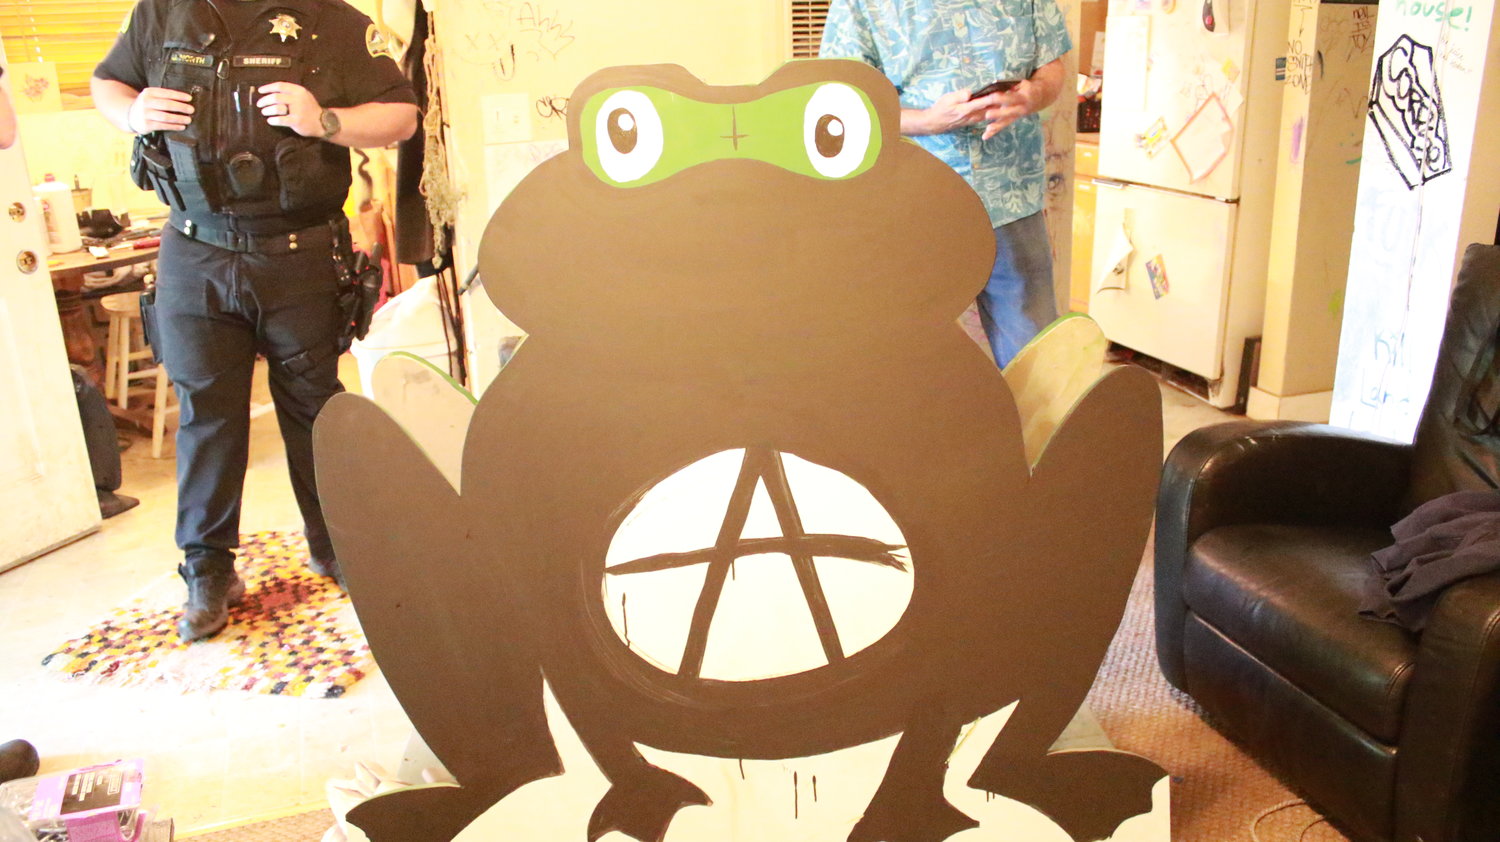 This is the cutout frog allegedly stolen last year from the nearby Frog Pond Grocery, found inside the house on June 4, 2021.